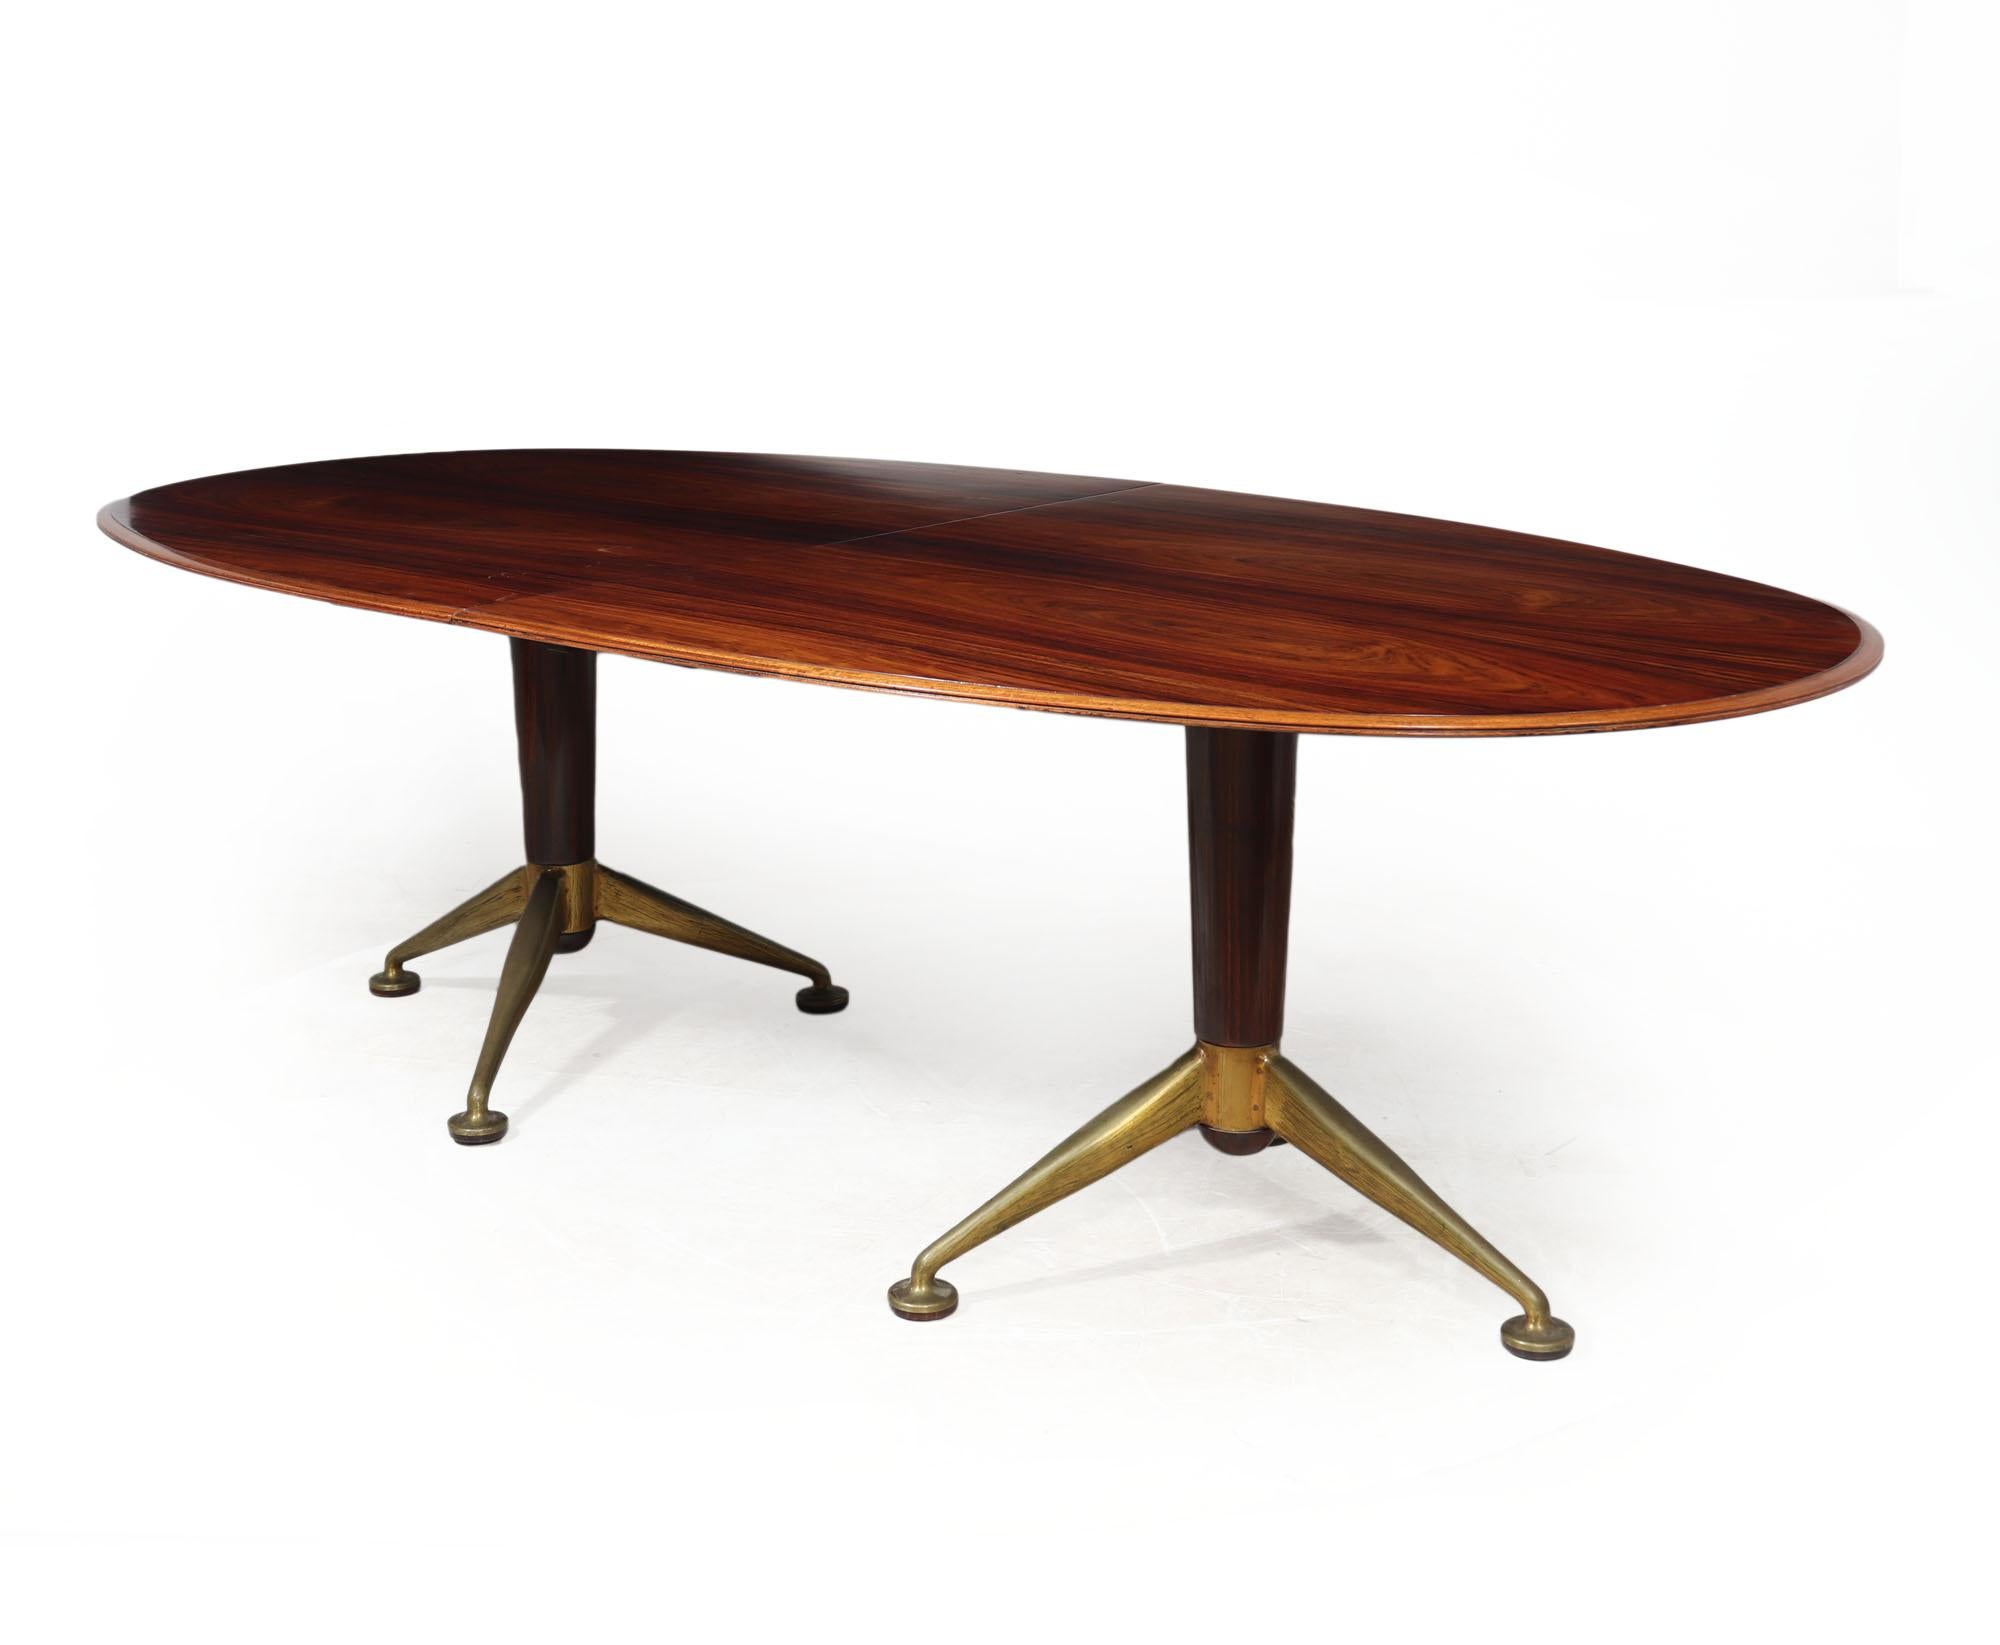  Dining table - Andrew Milne

An original 1950s Andrew J Milne dining table for Heals London featuring an elegant oval design crafted using rich santos rosewood. The table stands on set of distinctive brass splayed feet, anchored on a twin pedestal